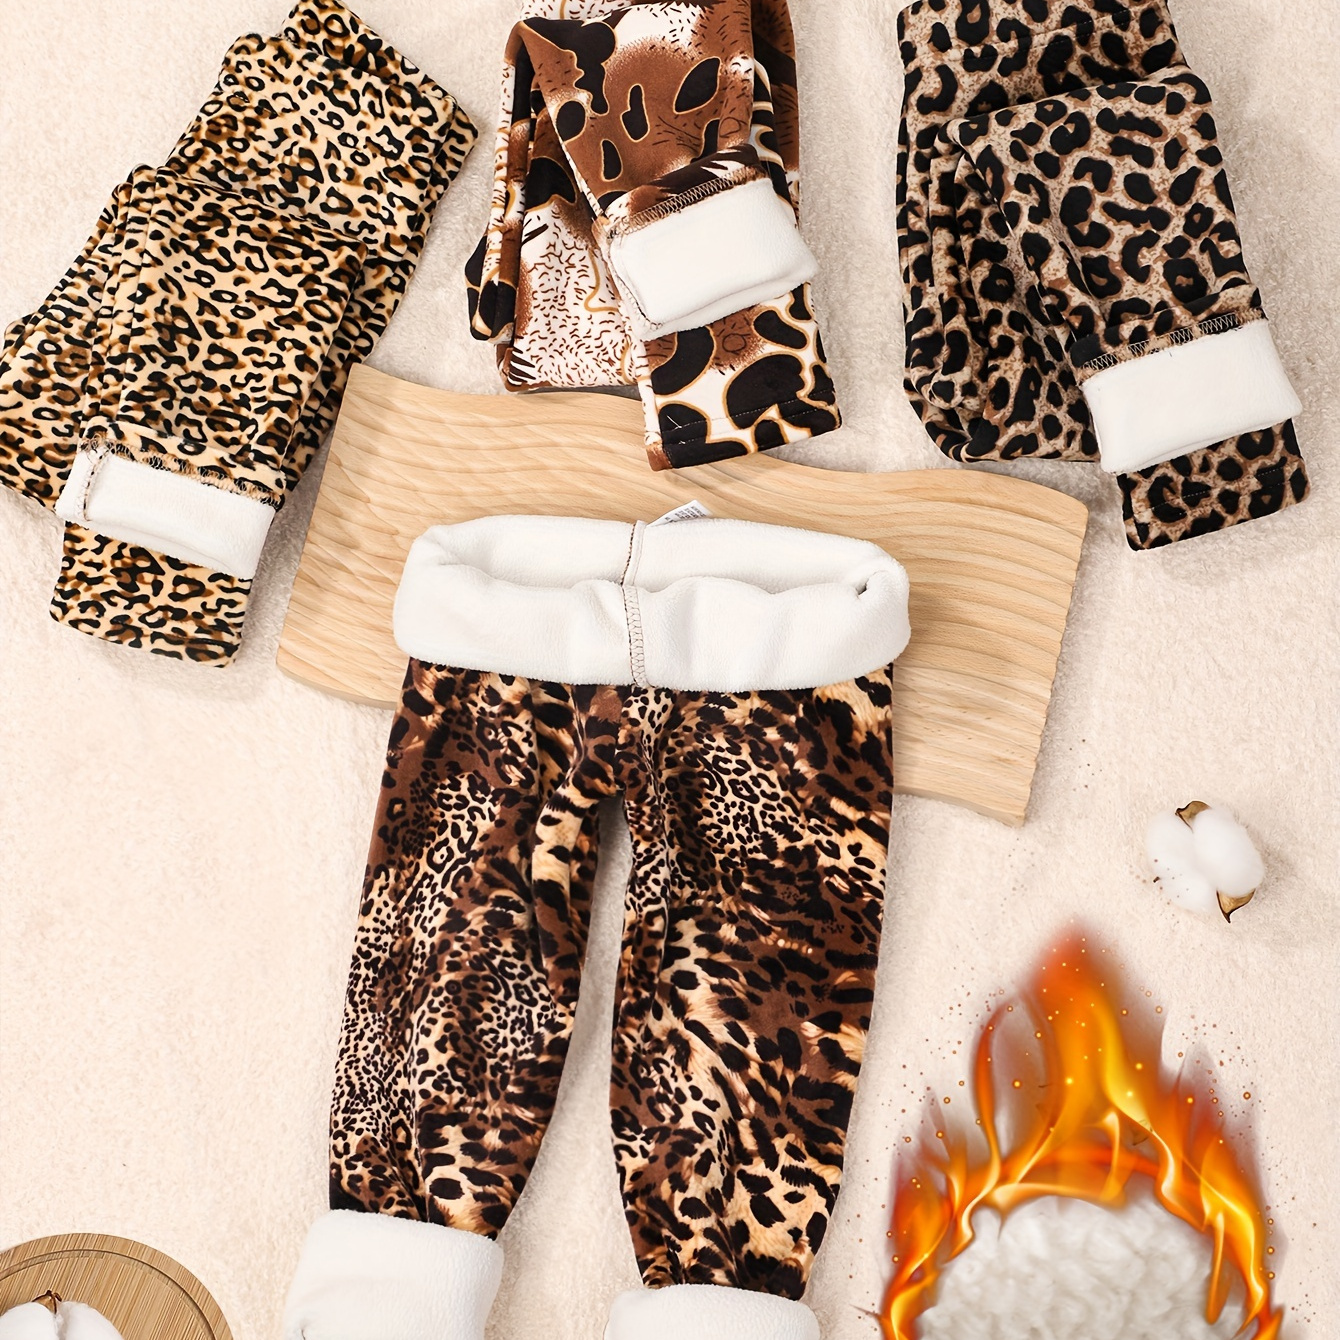 Leopard print Button Leggings - fleece lined and warm